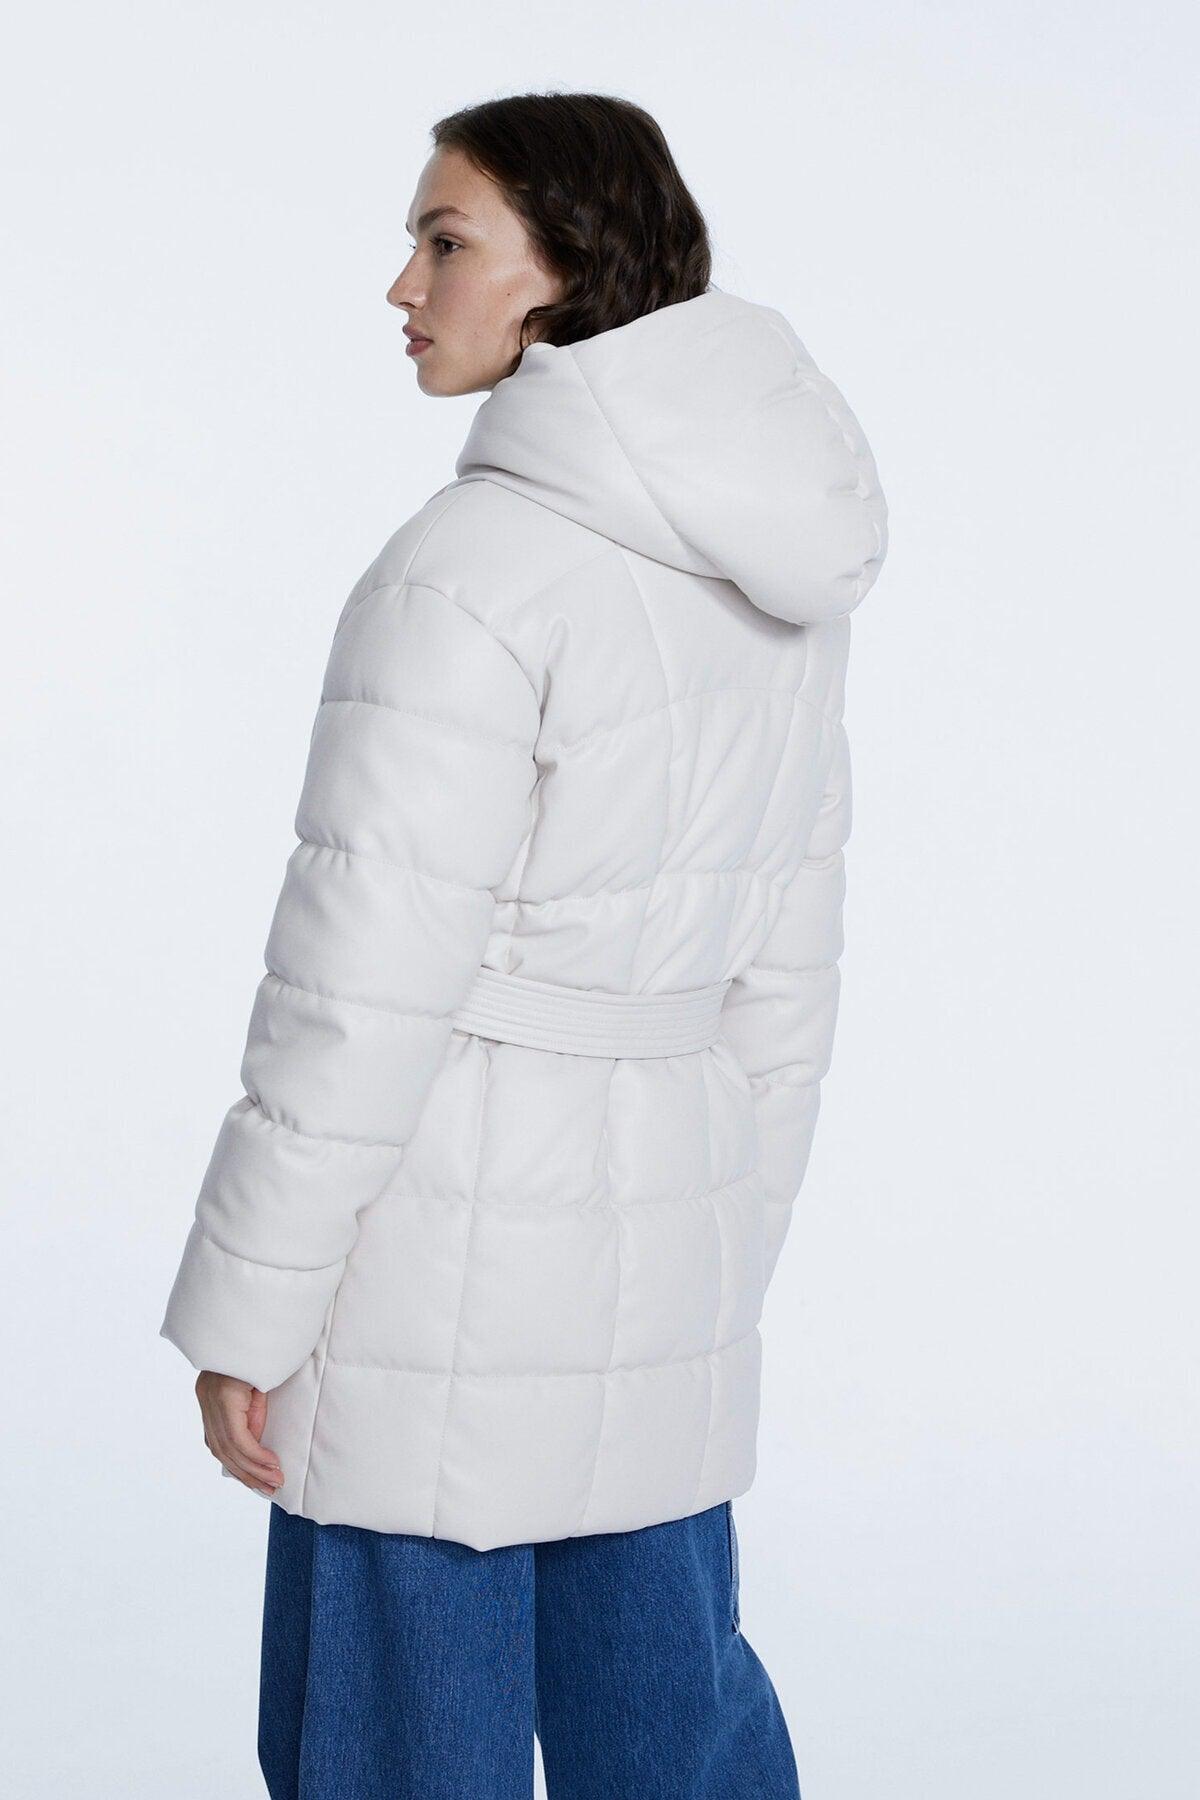 Arched Faux Leather Inflatable Coat - Swordslife